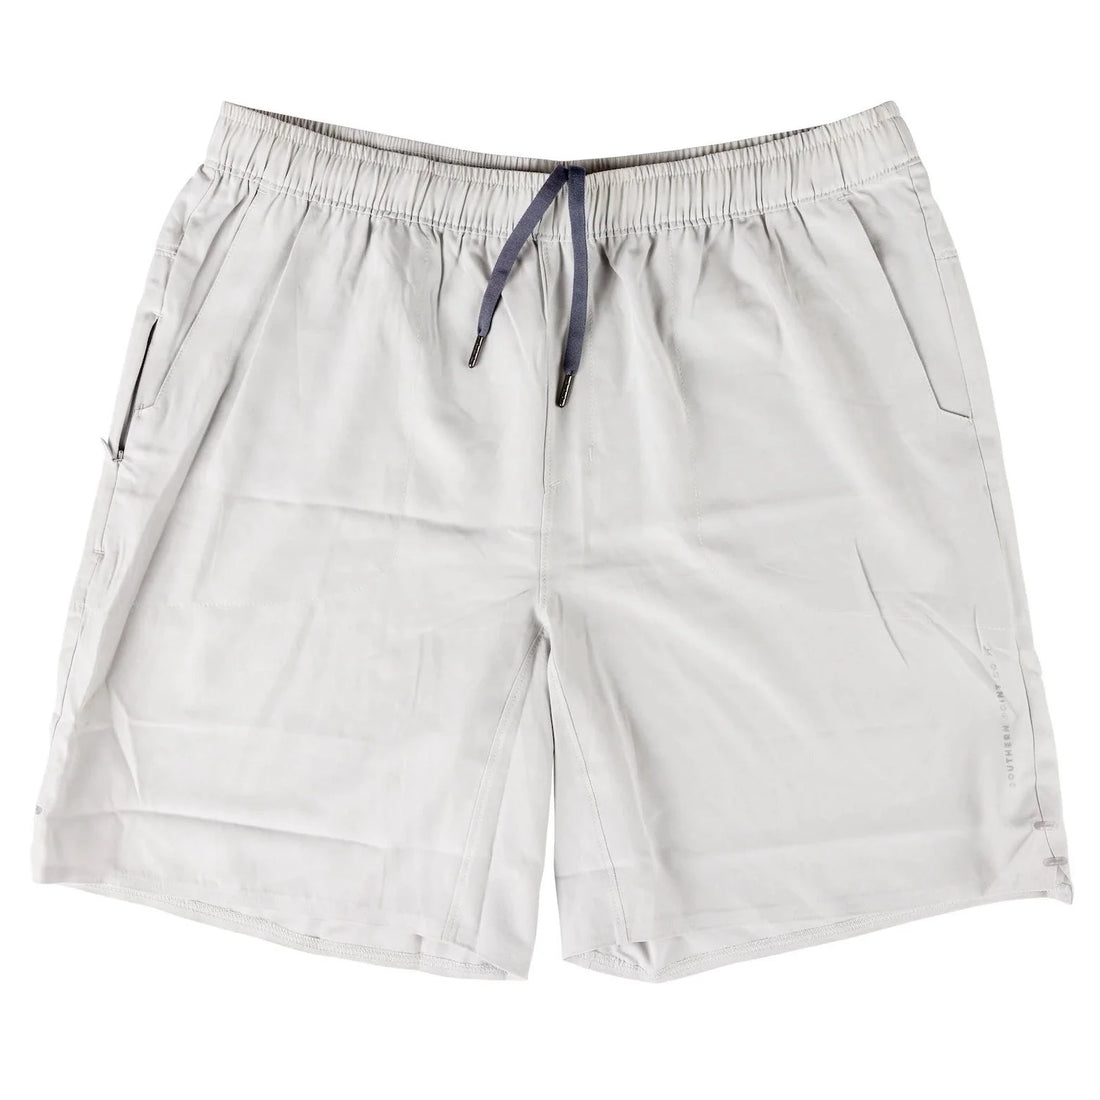 Southern Point Co. Condition Shorts